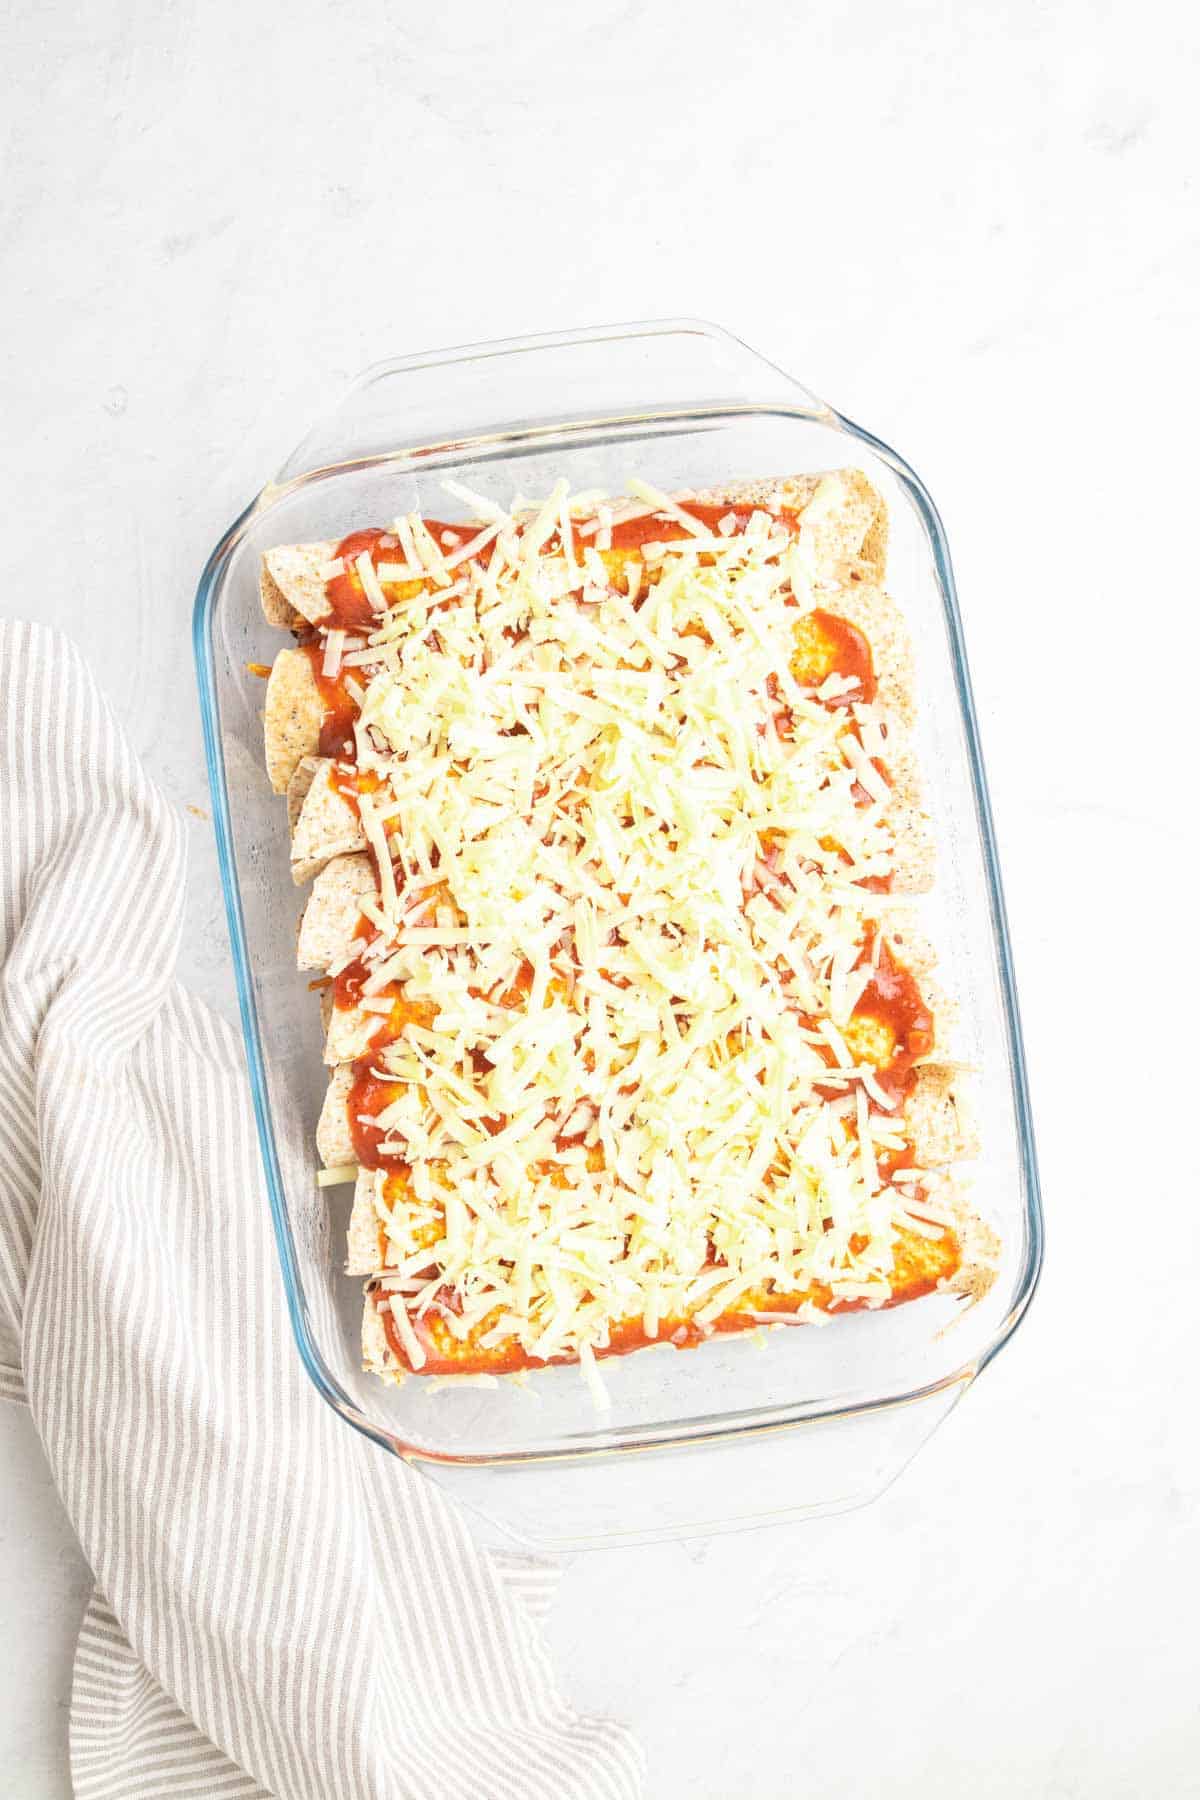 Rolled enchiladas in the baking dish topped with enchilada sauce and cheese, as seen from above